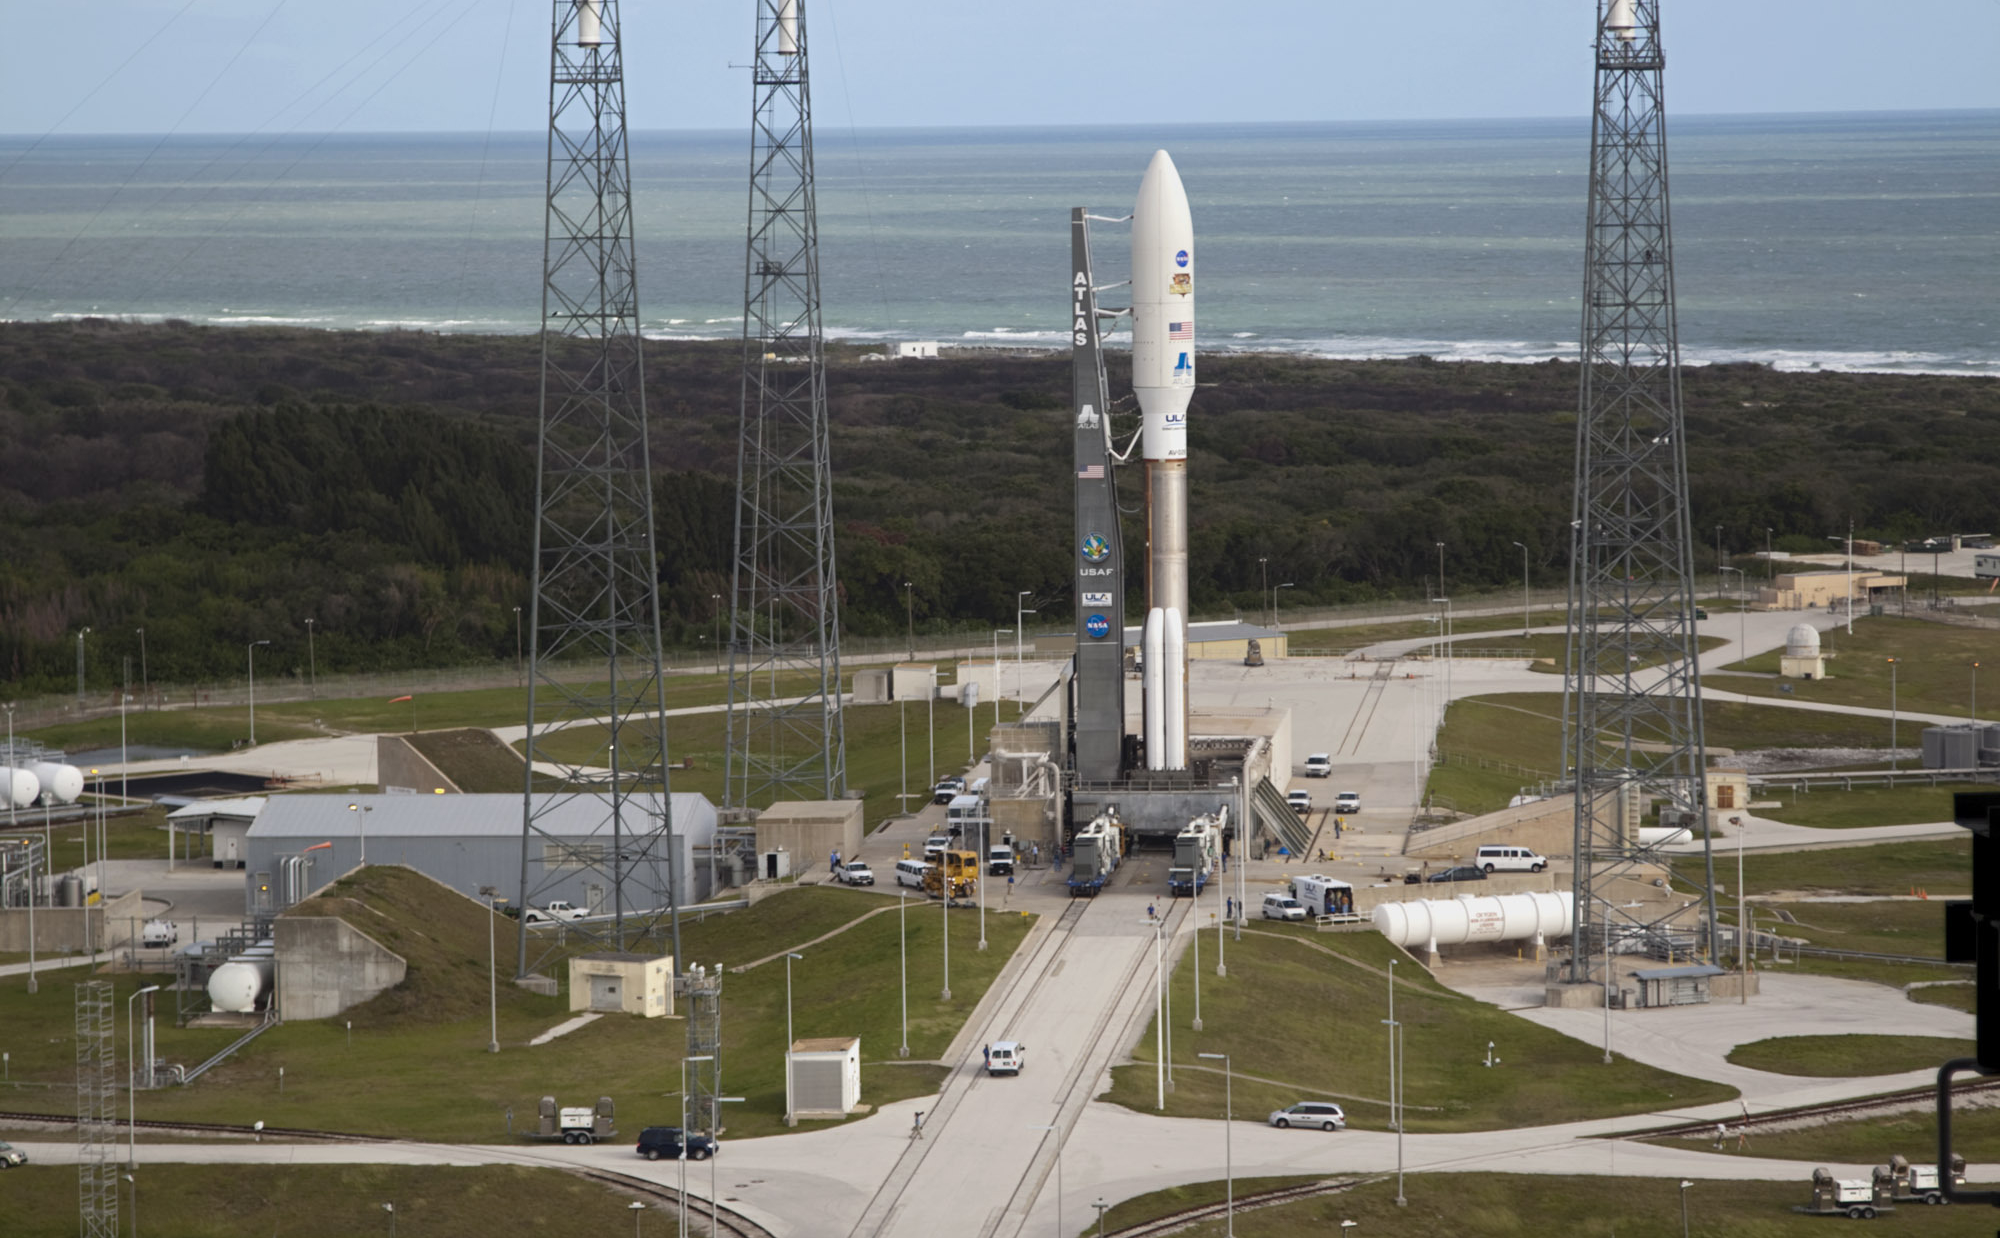 On Cape Canaveral Air Force Station in Florida, the 197-foot-tall United Launch Alliance Atlas V rocket is in place at Space Launch Complex 41 after rolling out from the nearby Vertical Integration Facility (VIF).